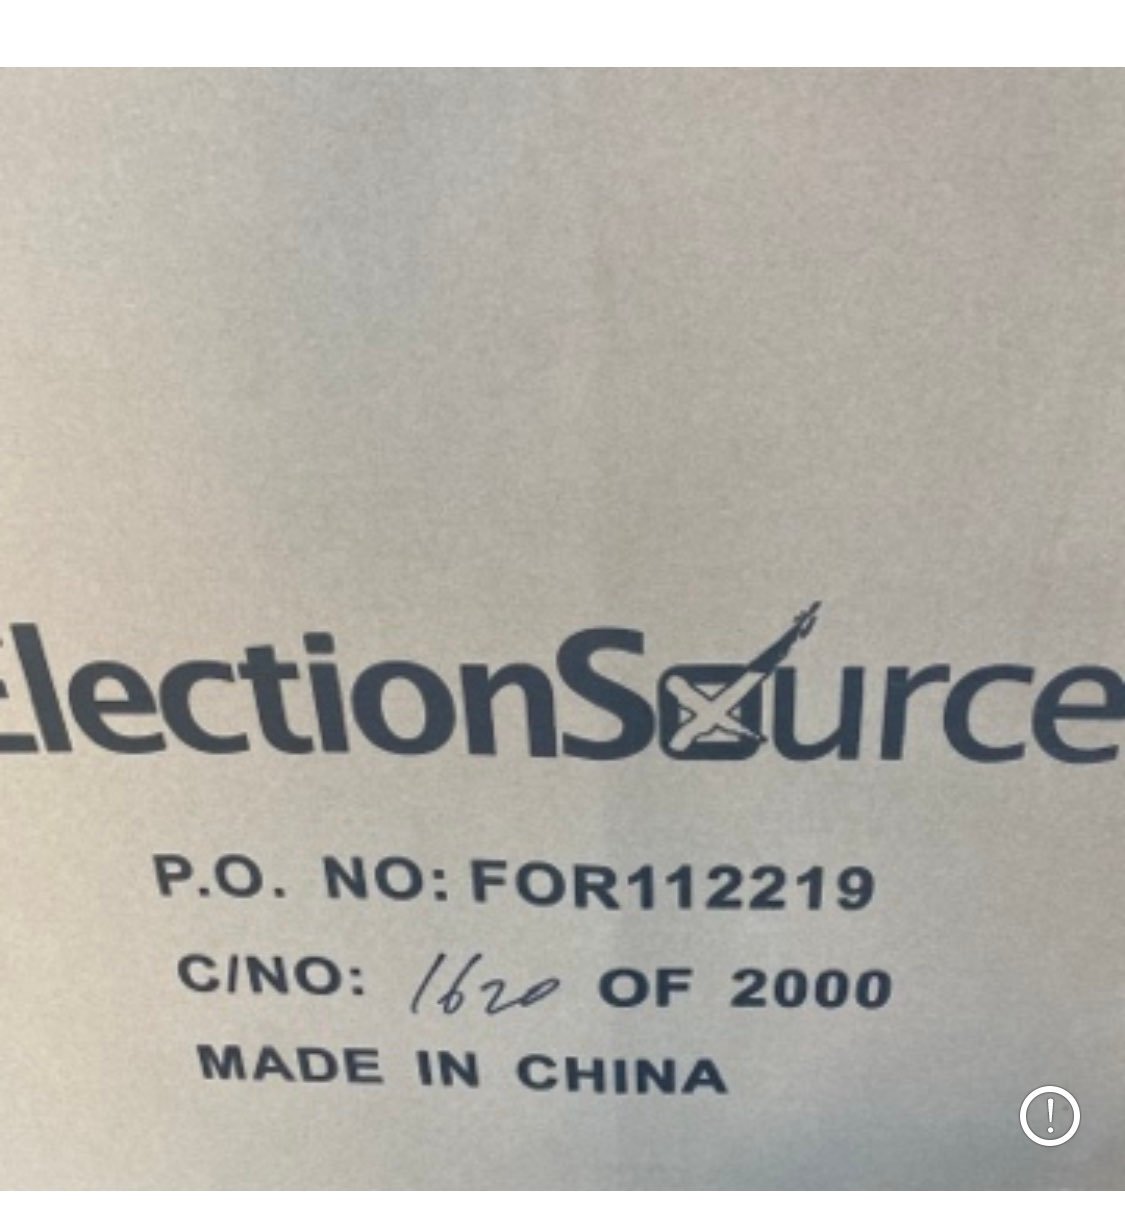 Dominion Received At Least 2,000 Large Boxes From China During 2020 Election